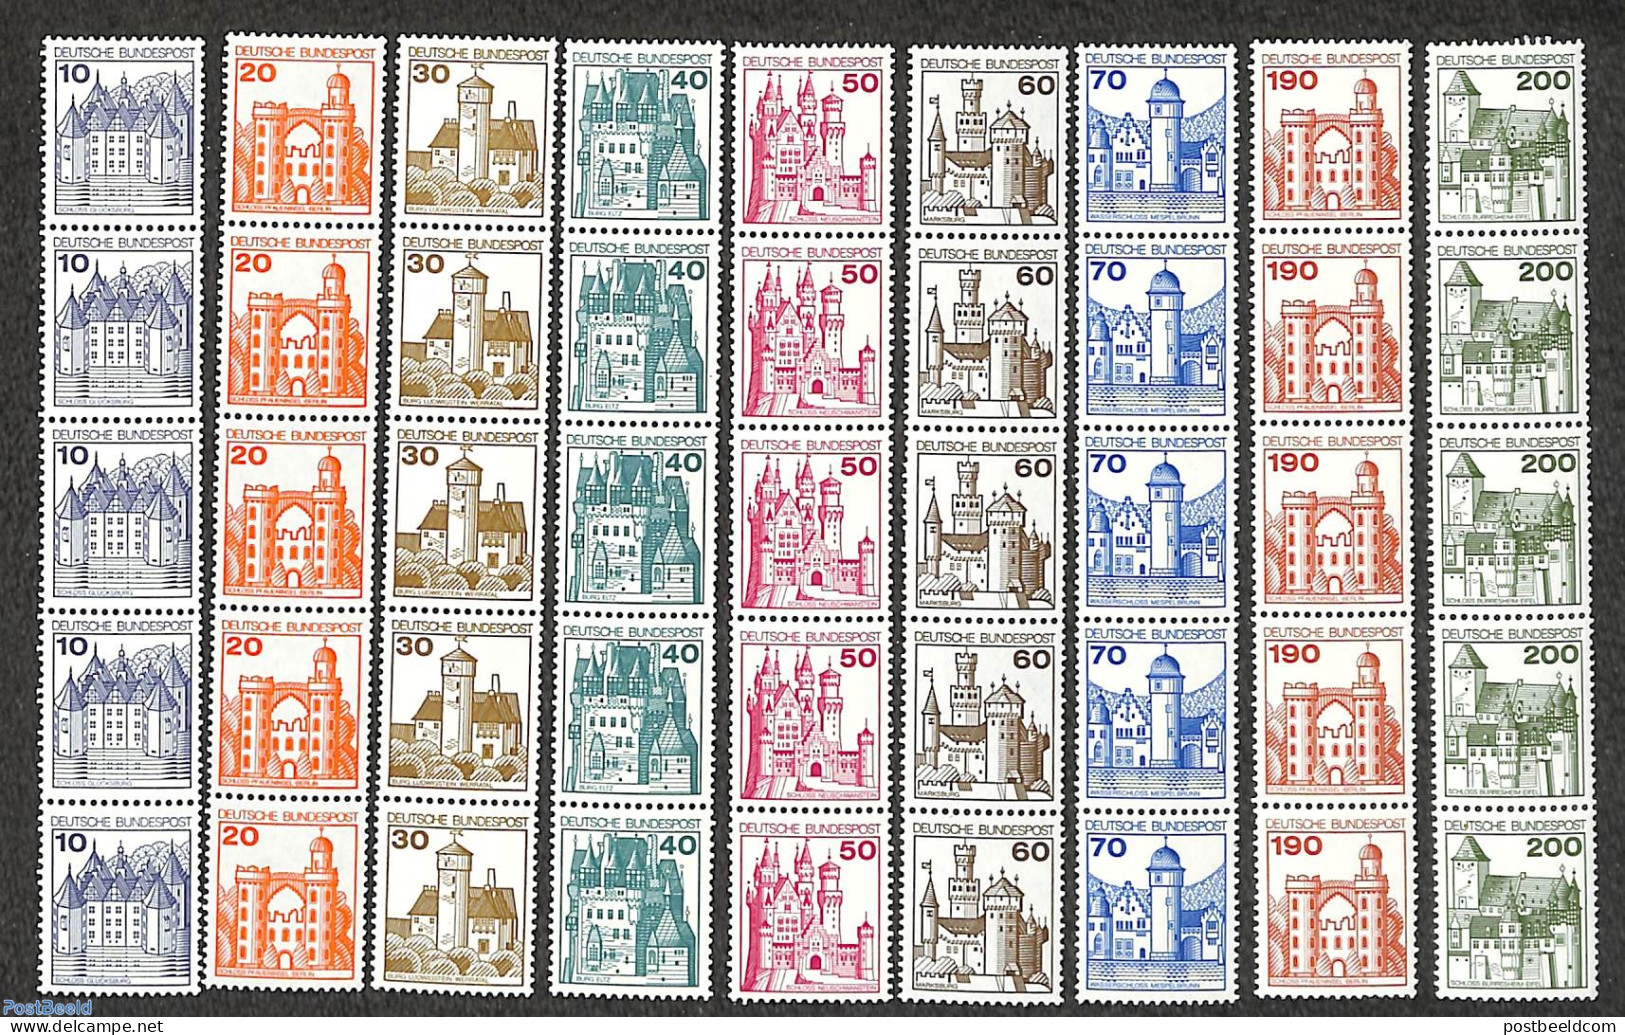 Germany, Berlin 1977 Definitives, 9v, Strips Of 5 With Number On Reverse, Mint NH, Art - Castles & Fortifications - Ungebraucht